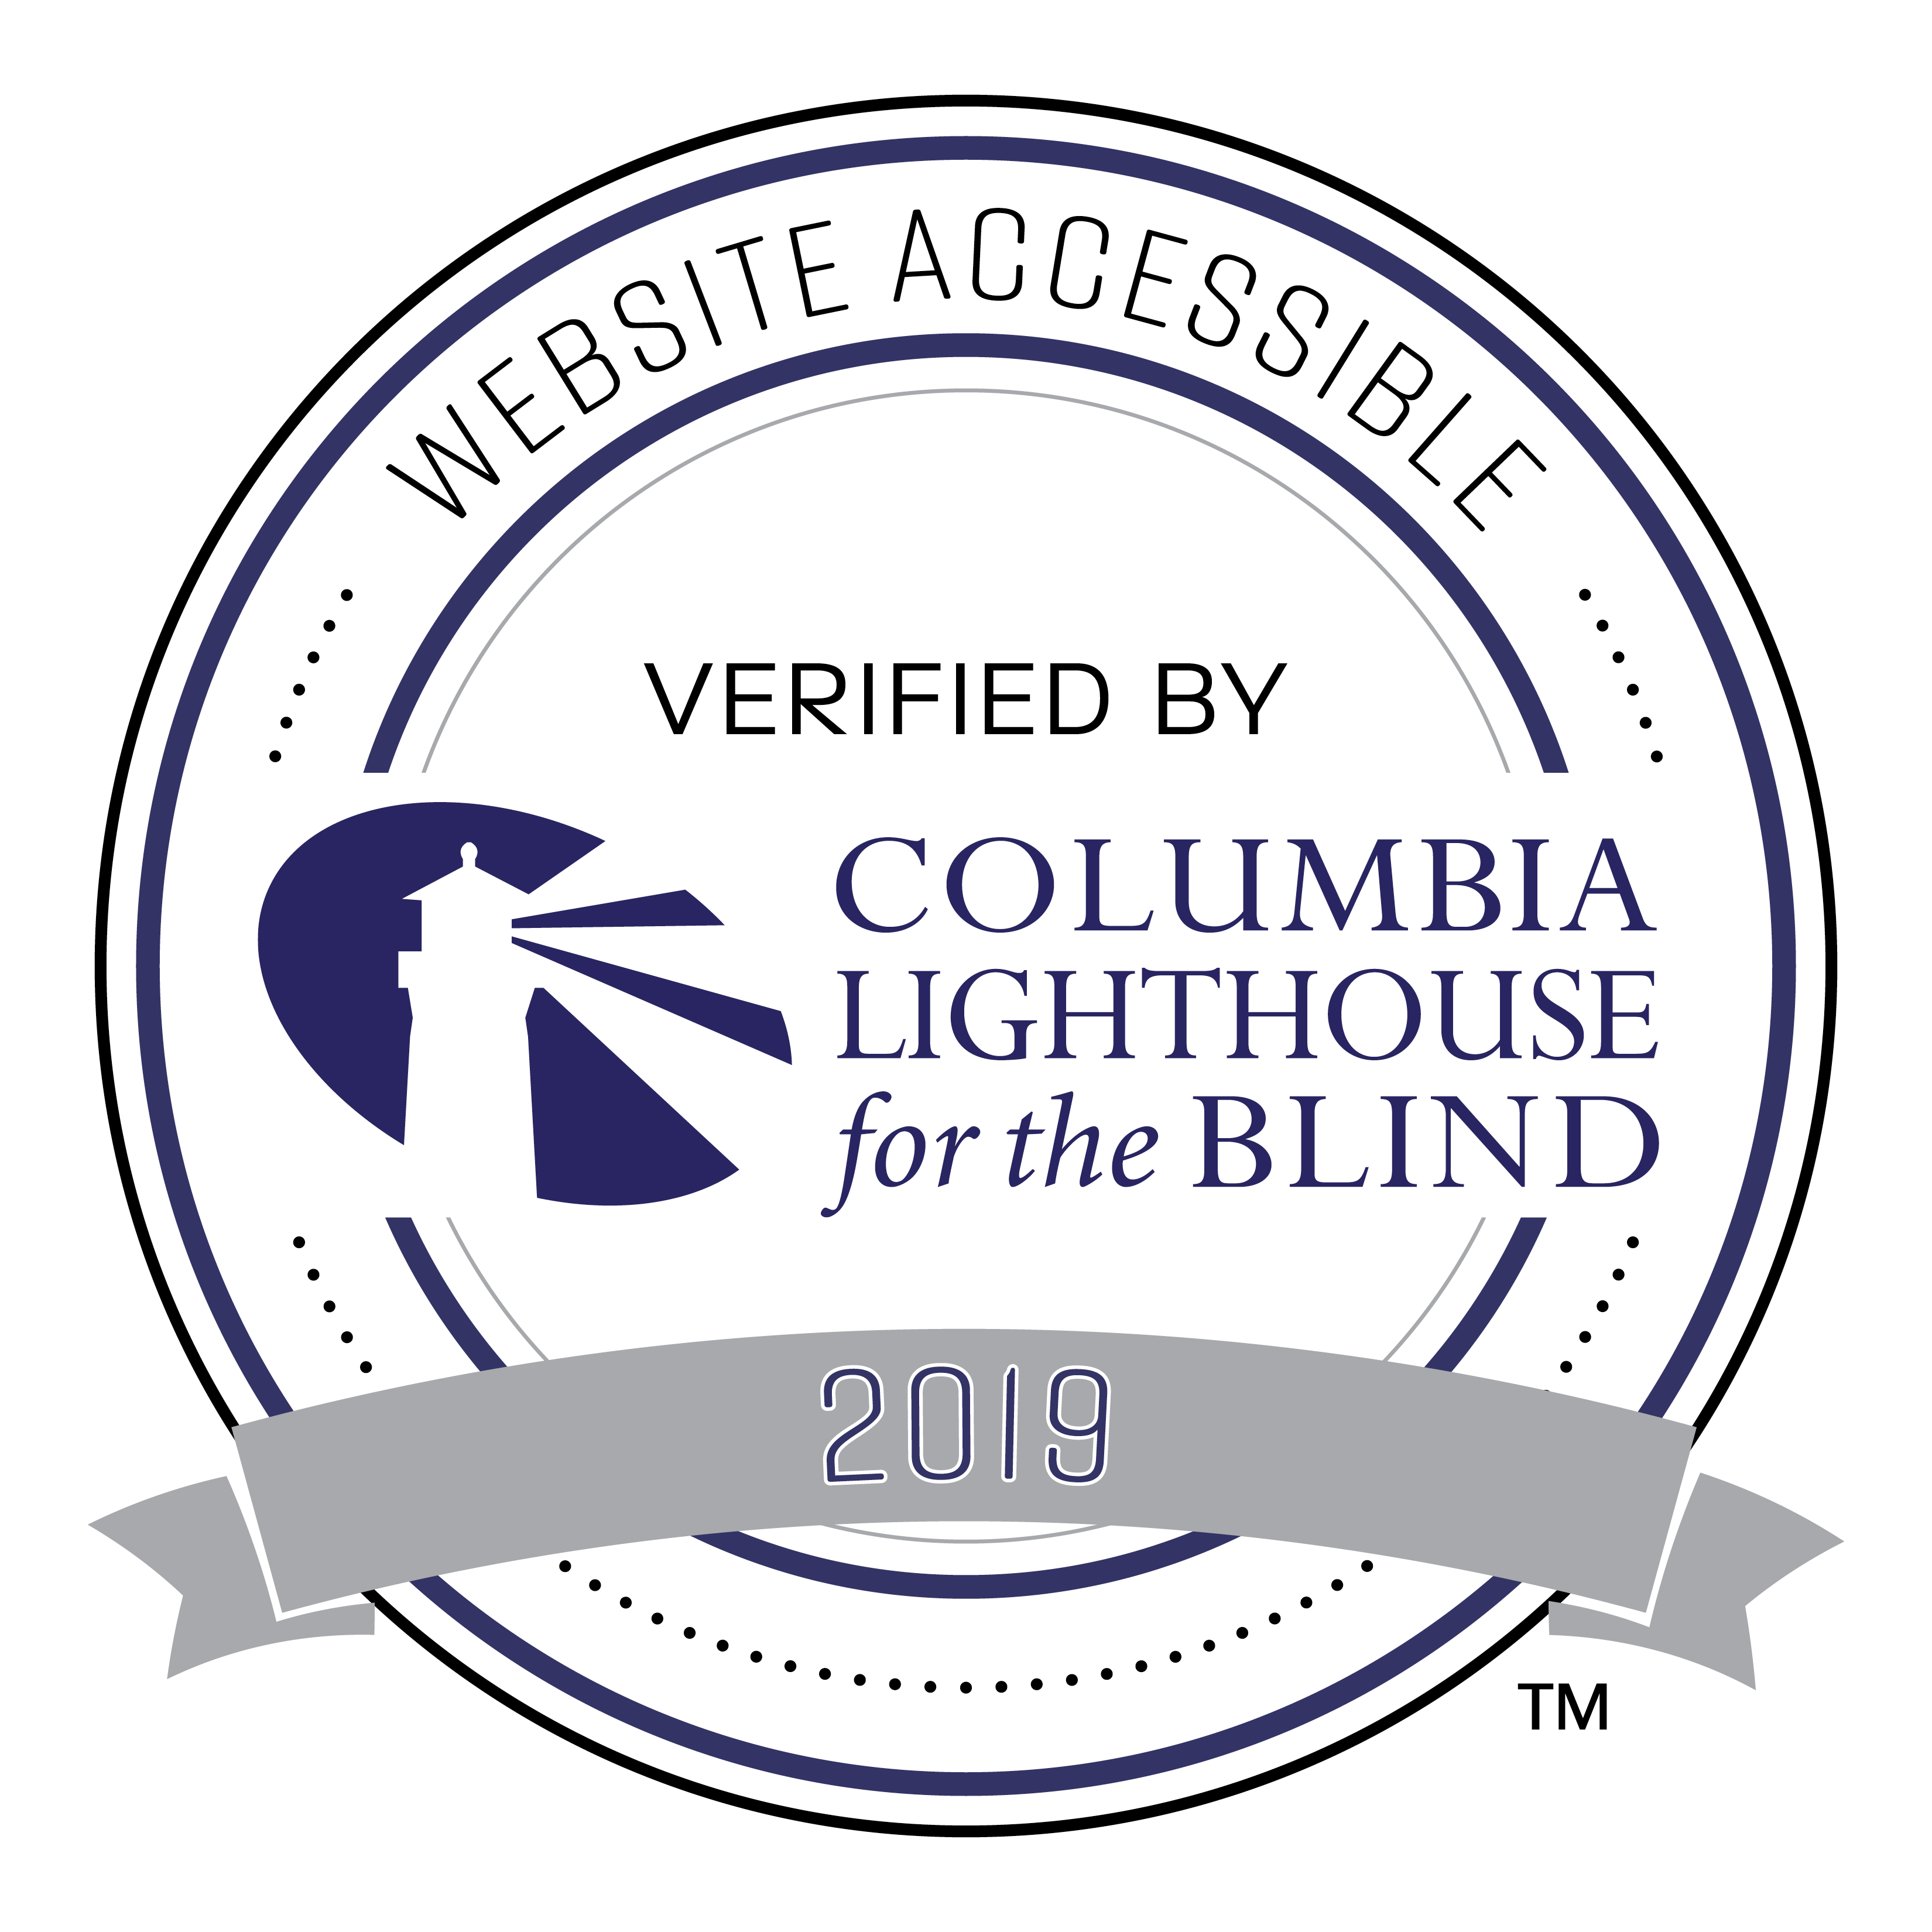 Website Accessible 2019 - Verified by Columbia Lighthouse for the Blind